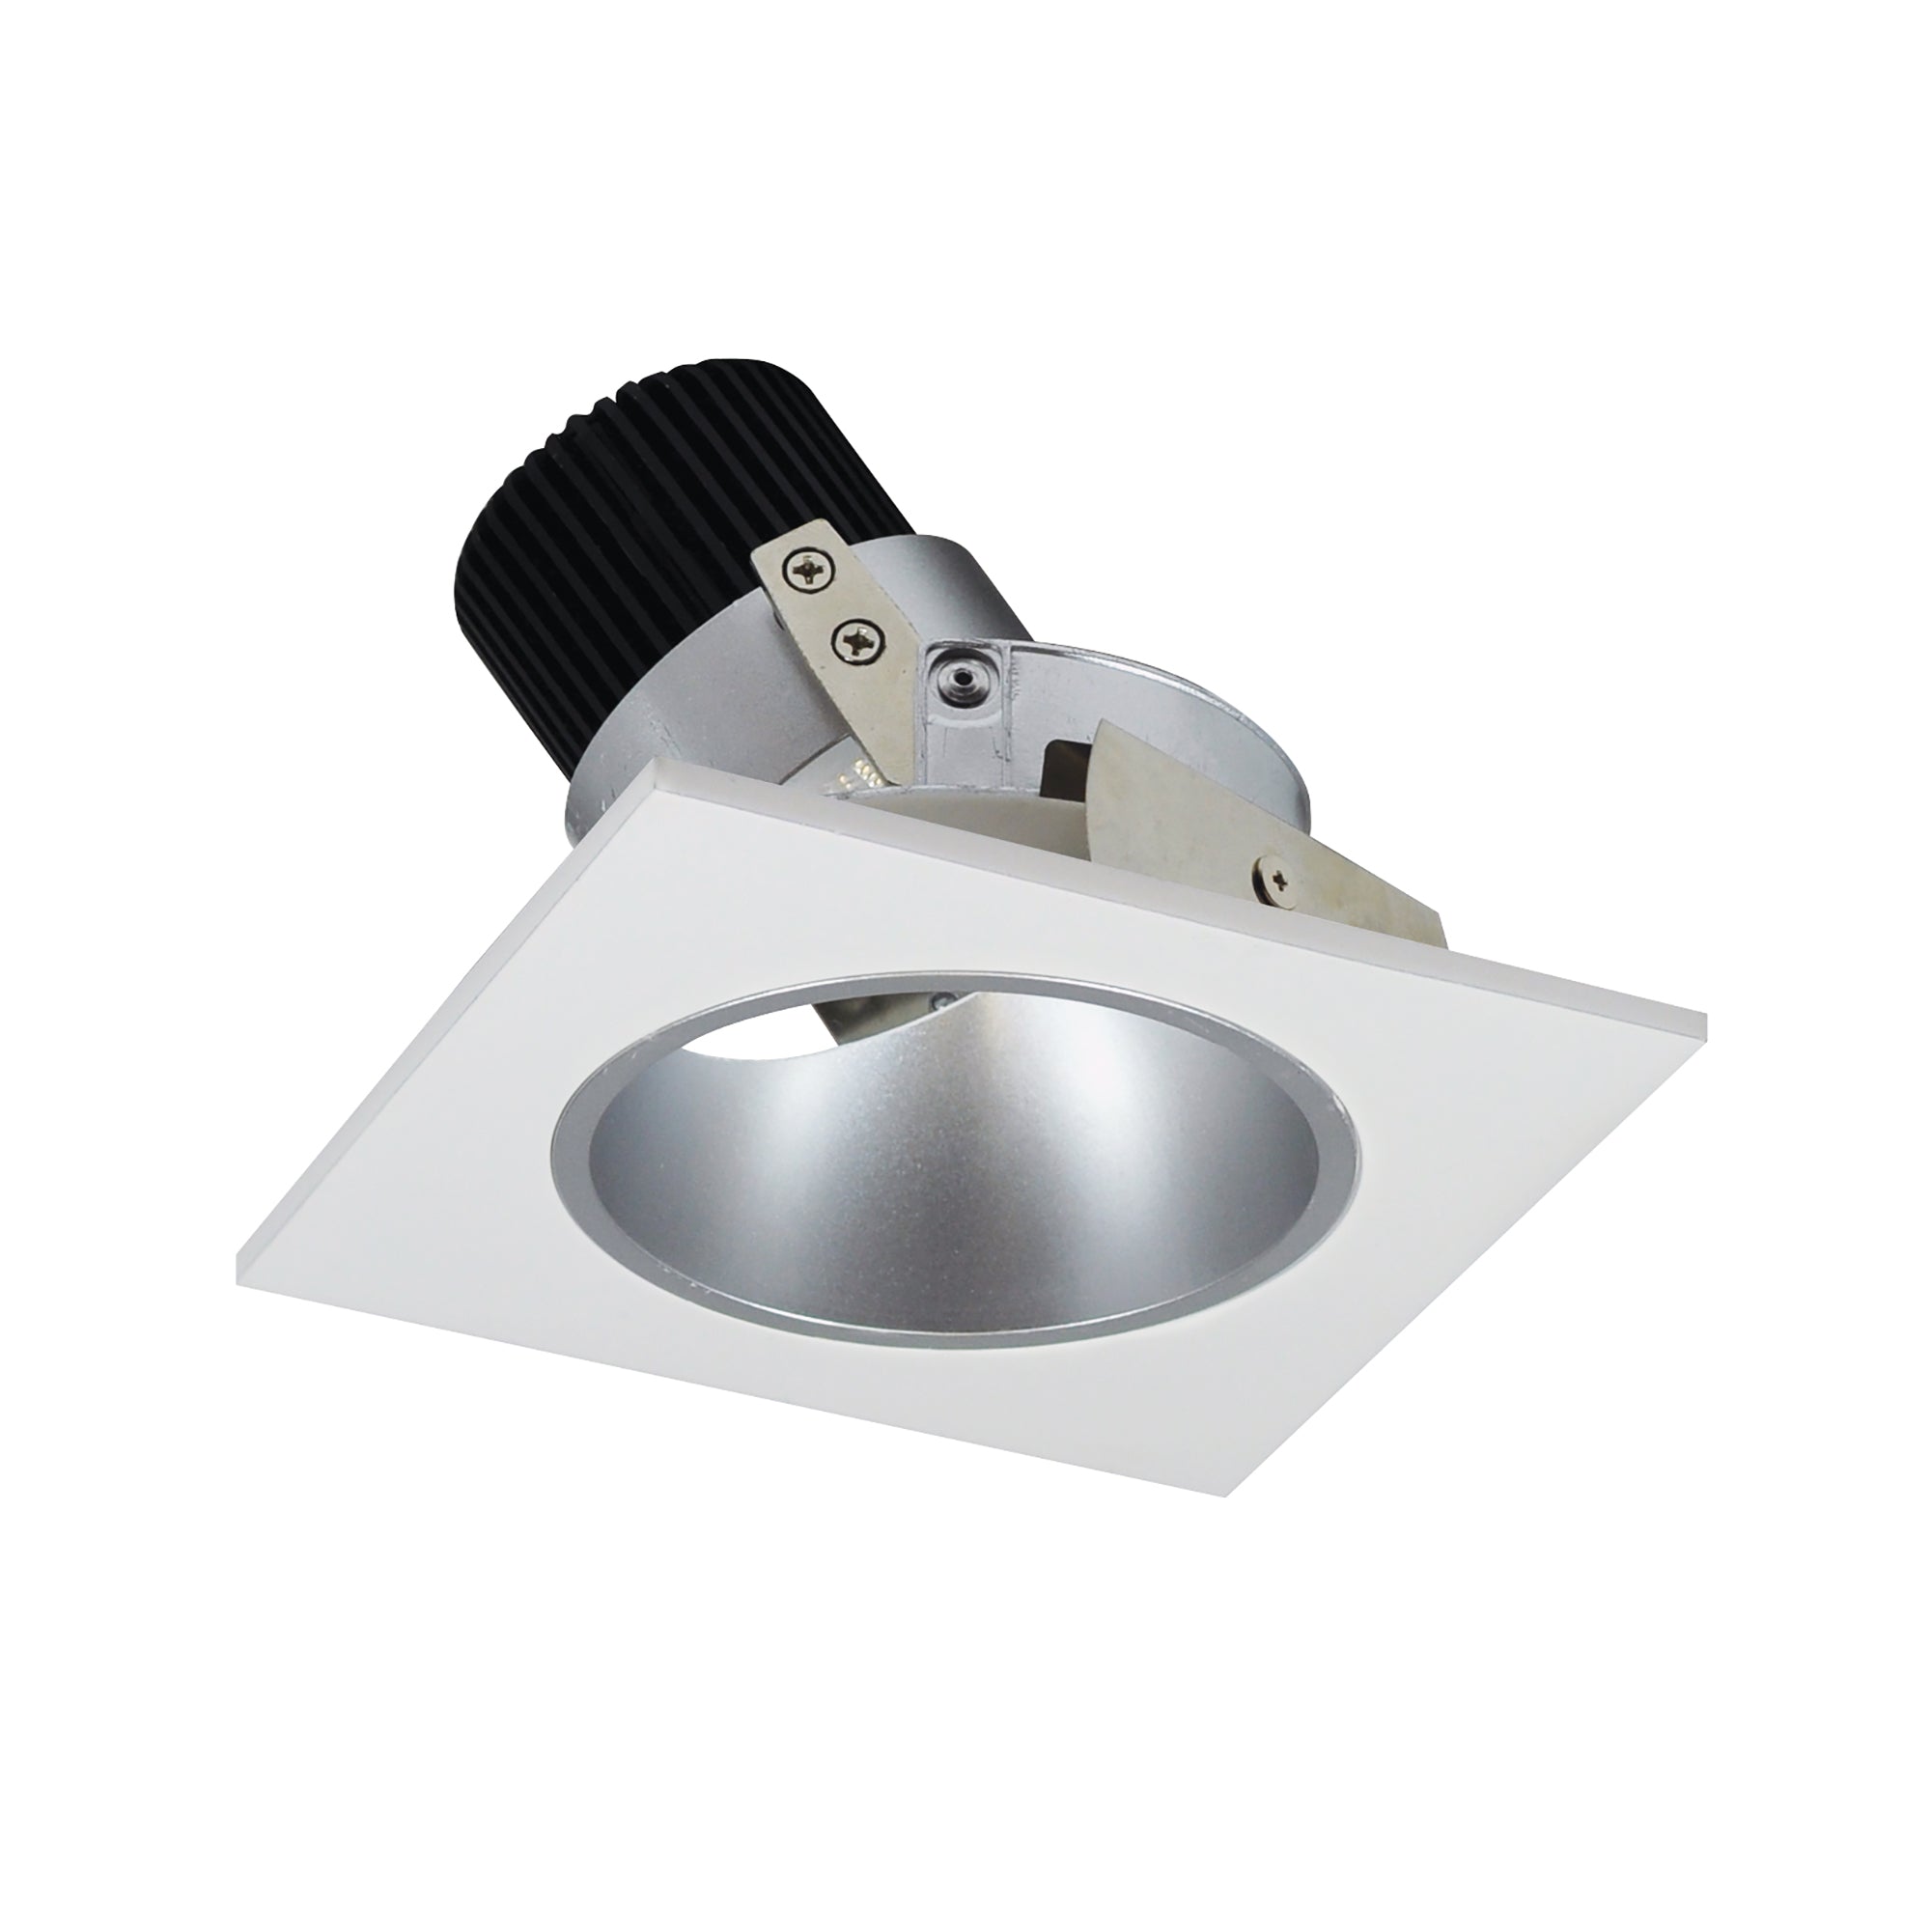 Nora Lighting NIO-4SD27QHW 4" Iolite LED Square Adjustable Reflector With Round Aperture, 10-Degree Optic, 800lm / 12W, 2700K - Haze Reflector / White Flange